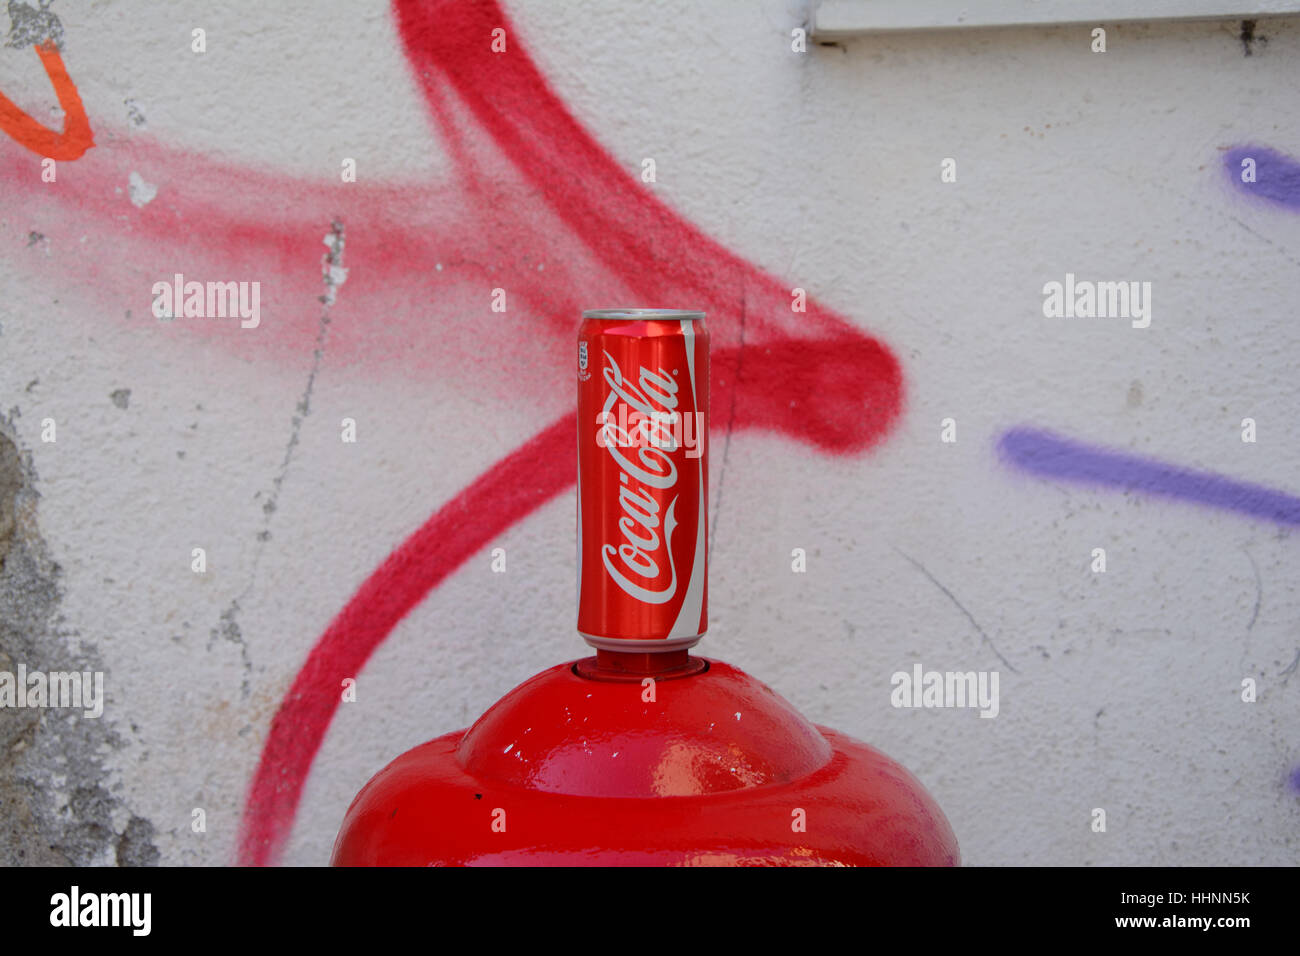 Venice, Italy - September 9, 2016: Coca Cola can standing on top of red hydrant at painted wall. Stock Photo